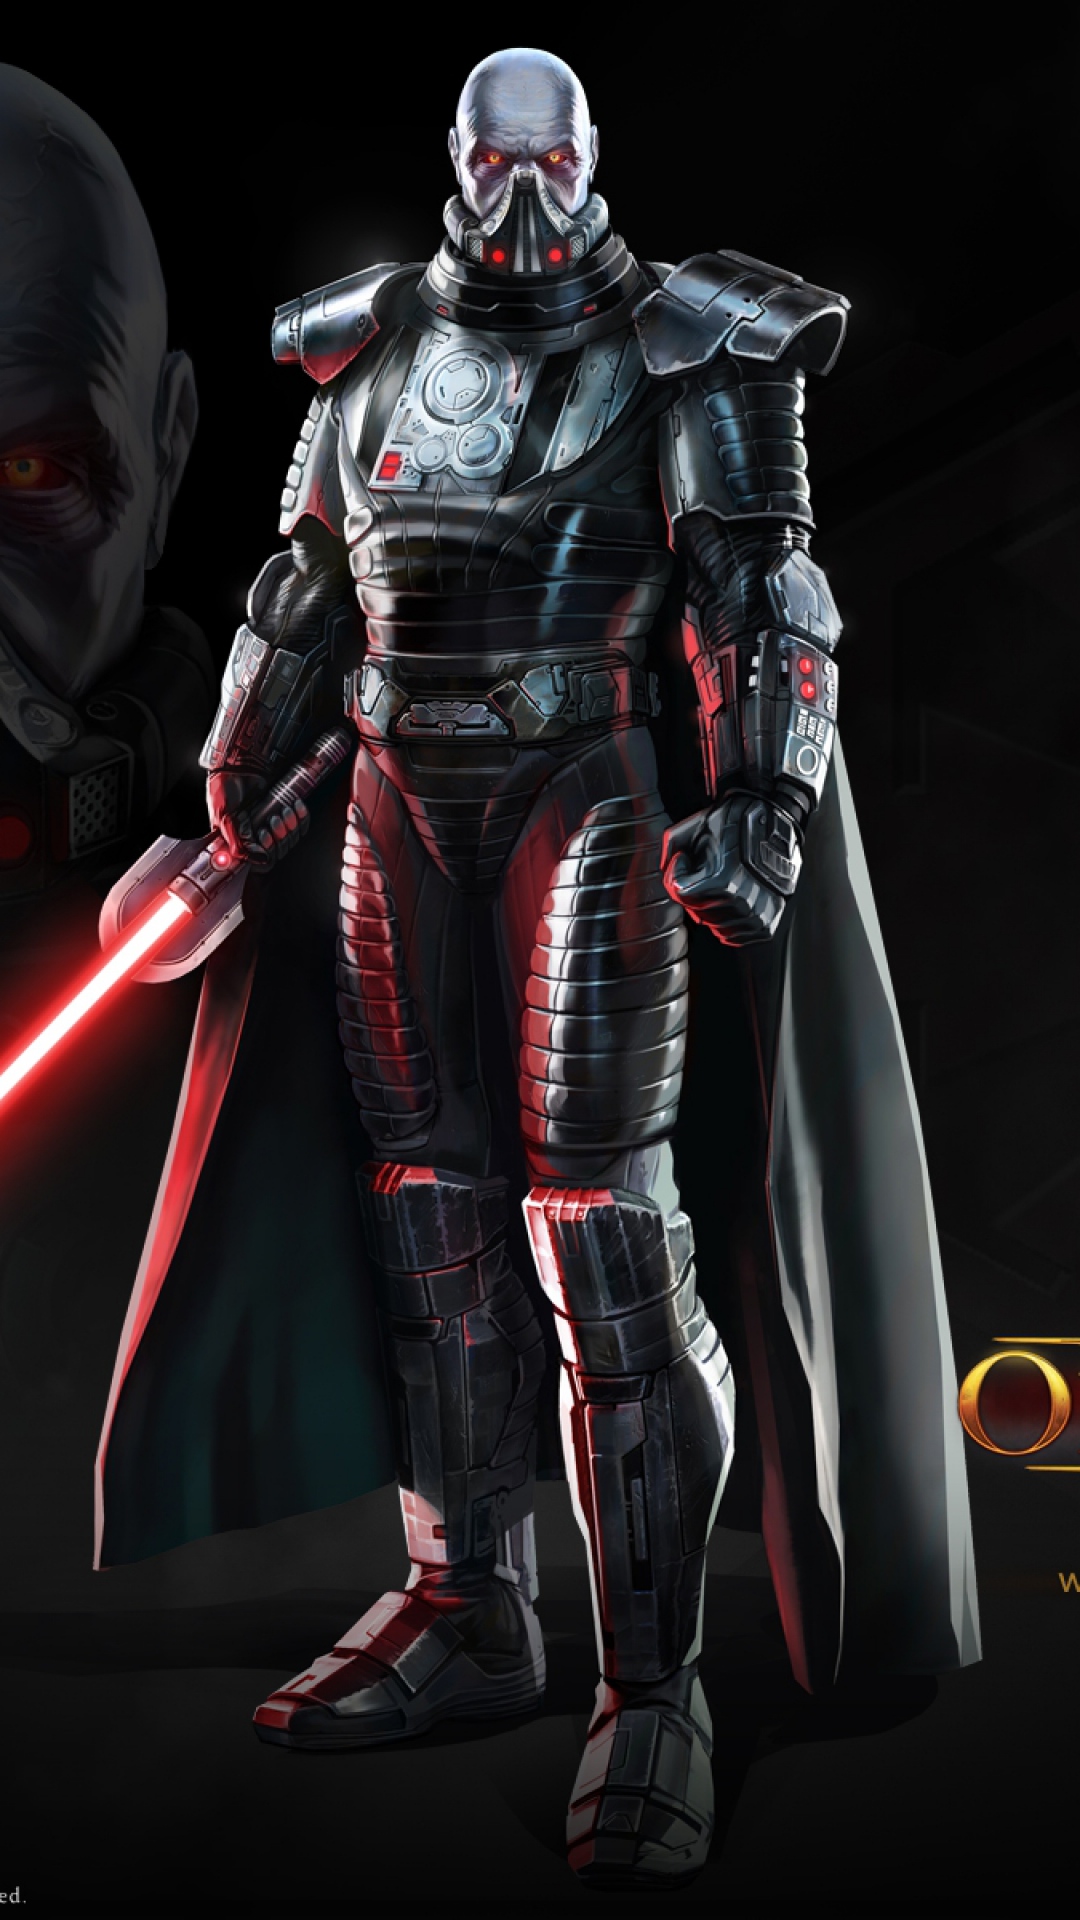 Wallpaper Star Wars The Old Republic Sith Warrior